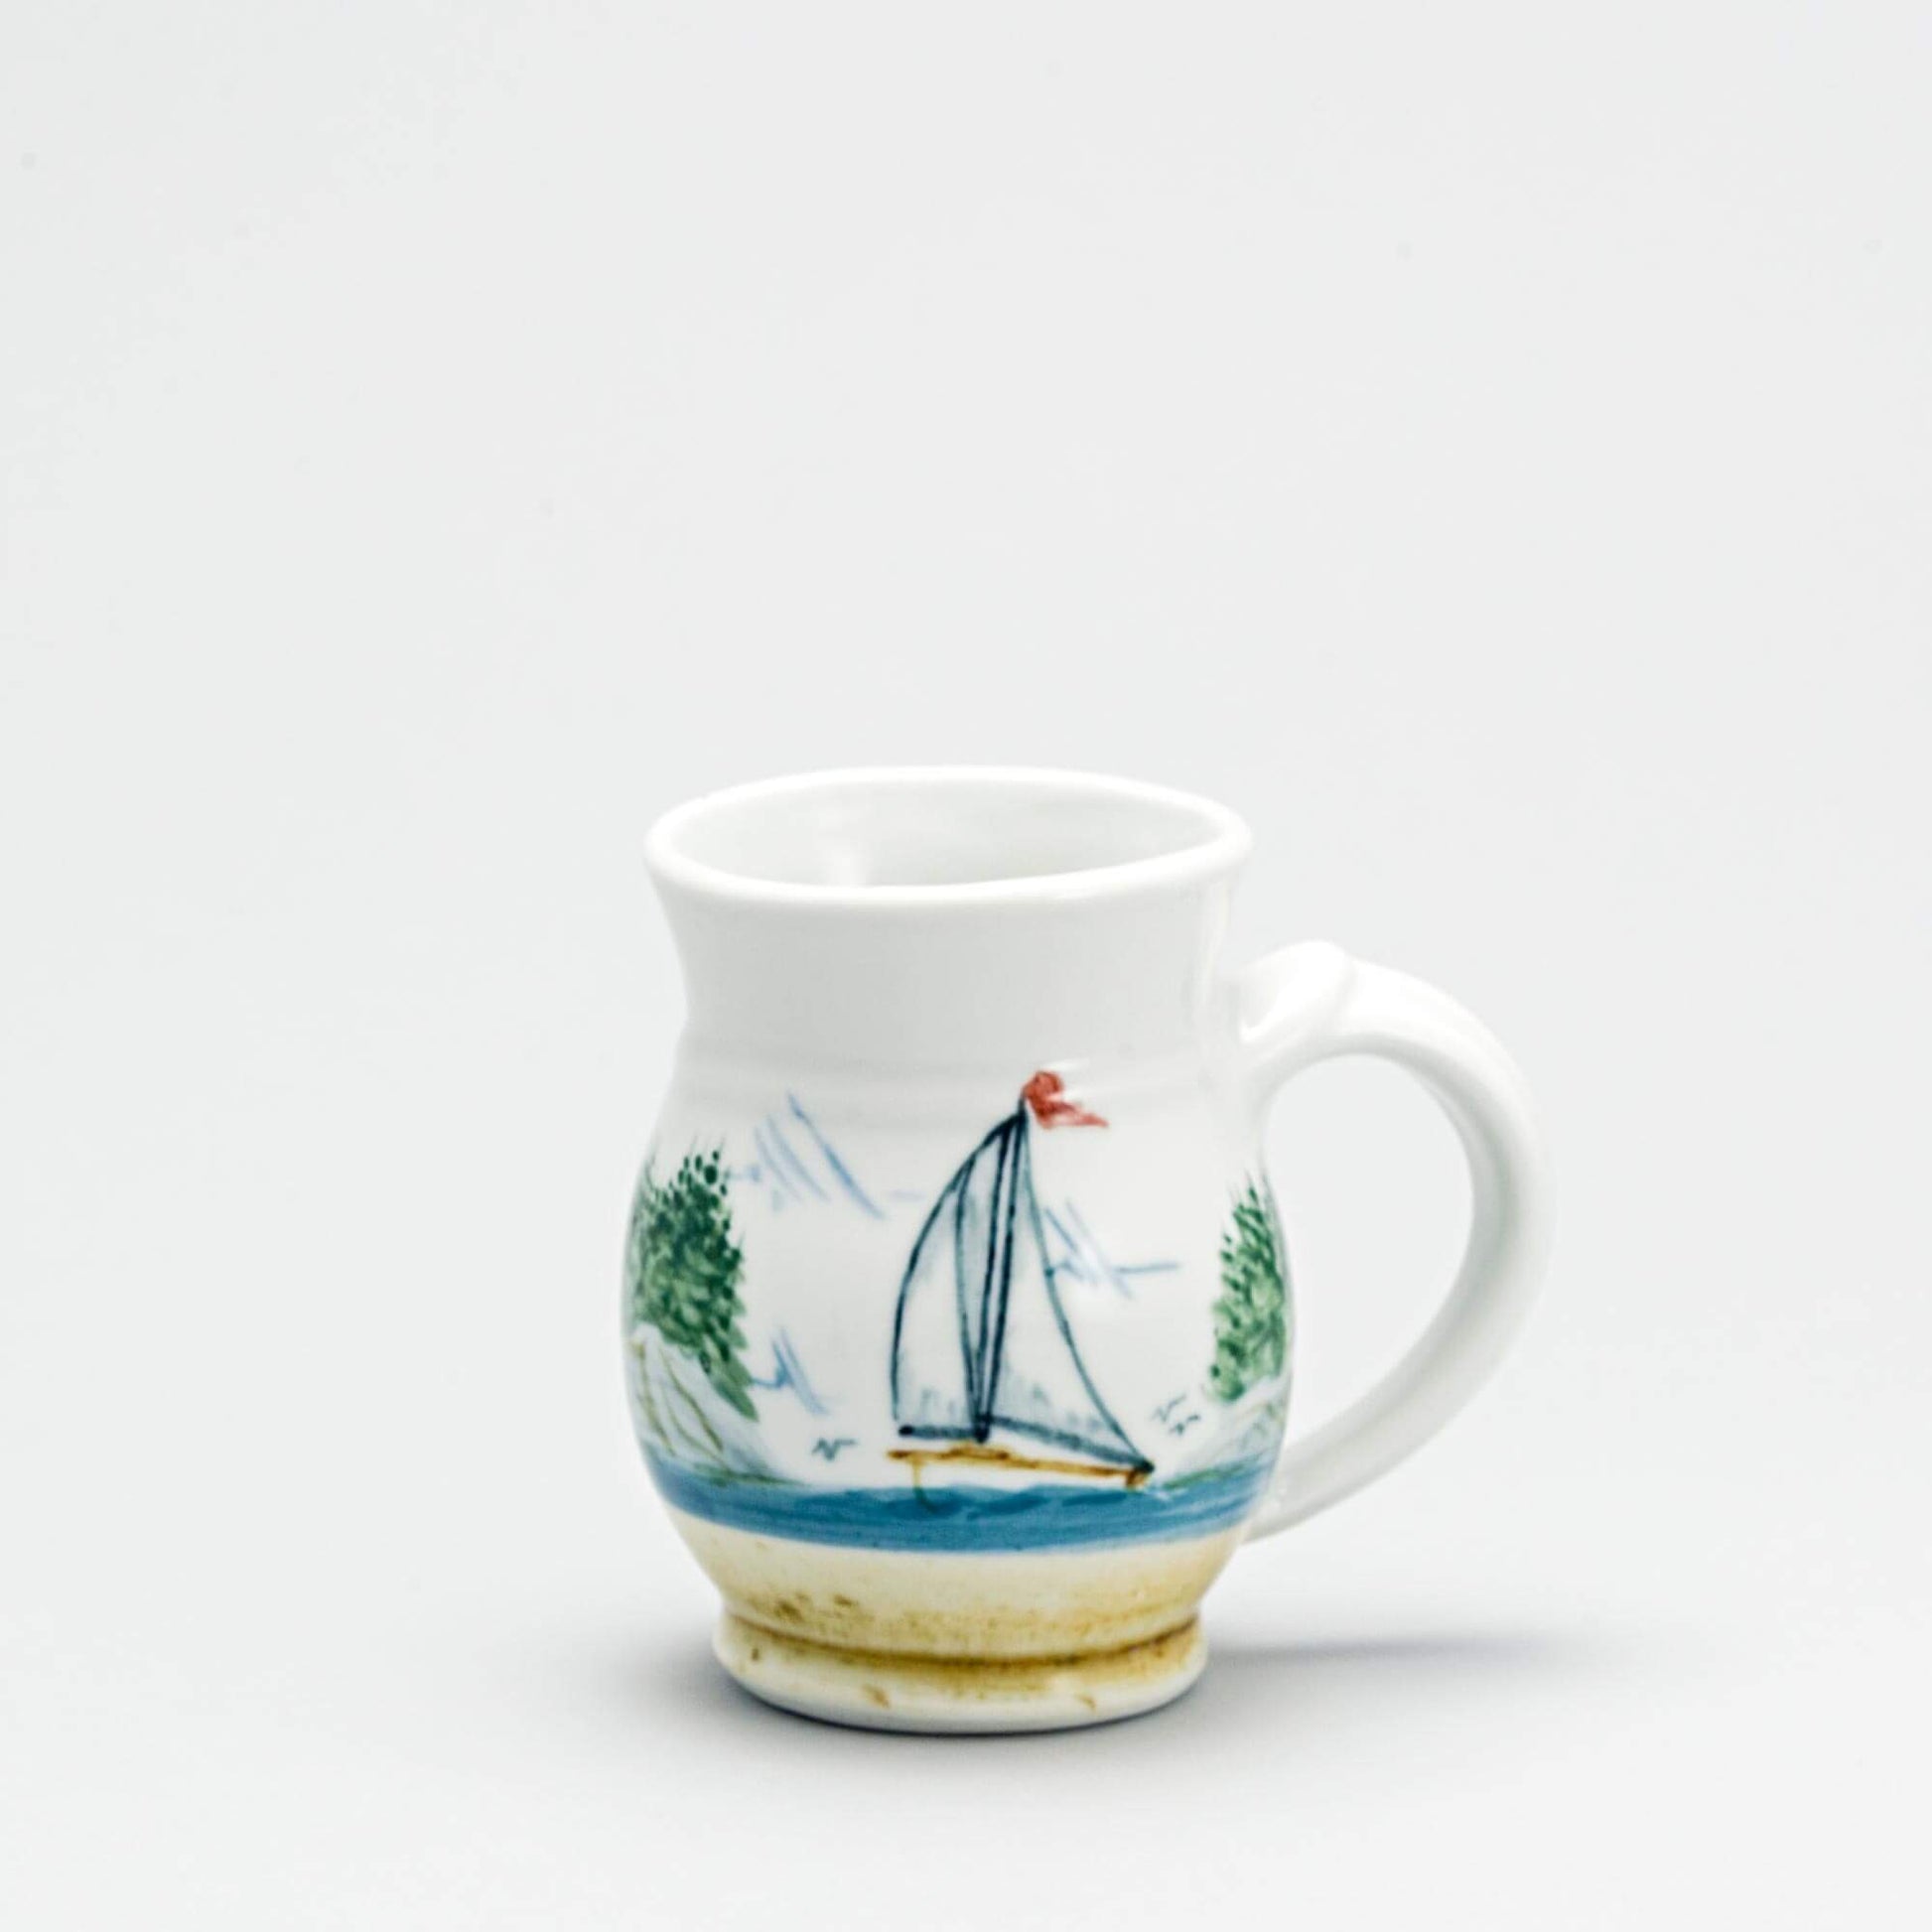 Handmade Pottery Curvy Mug made by Georgetown Pottery in Maine Sailboat